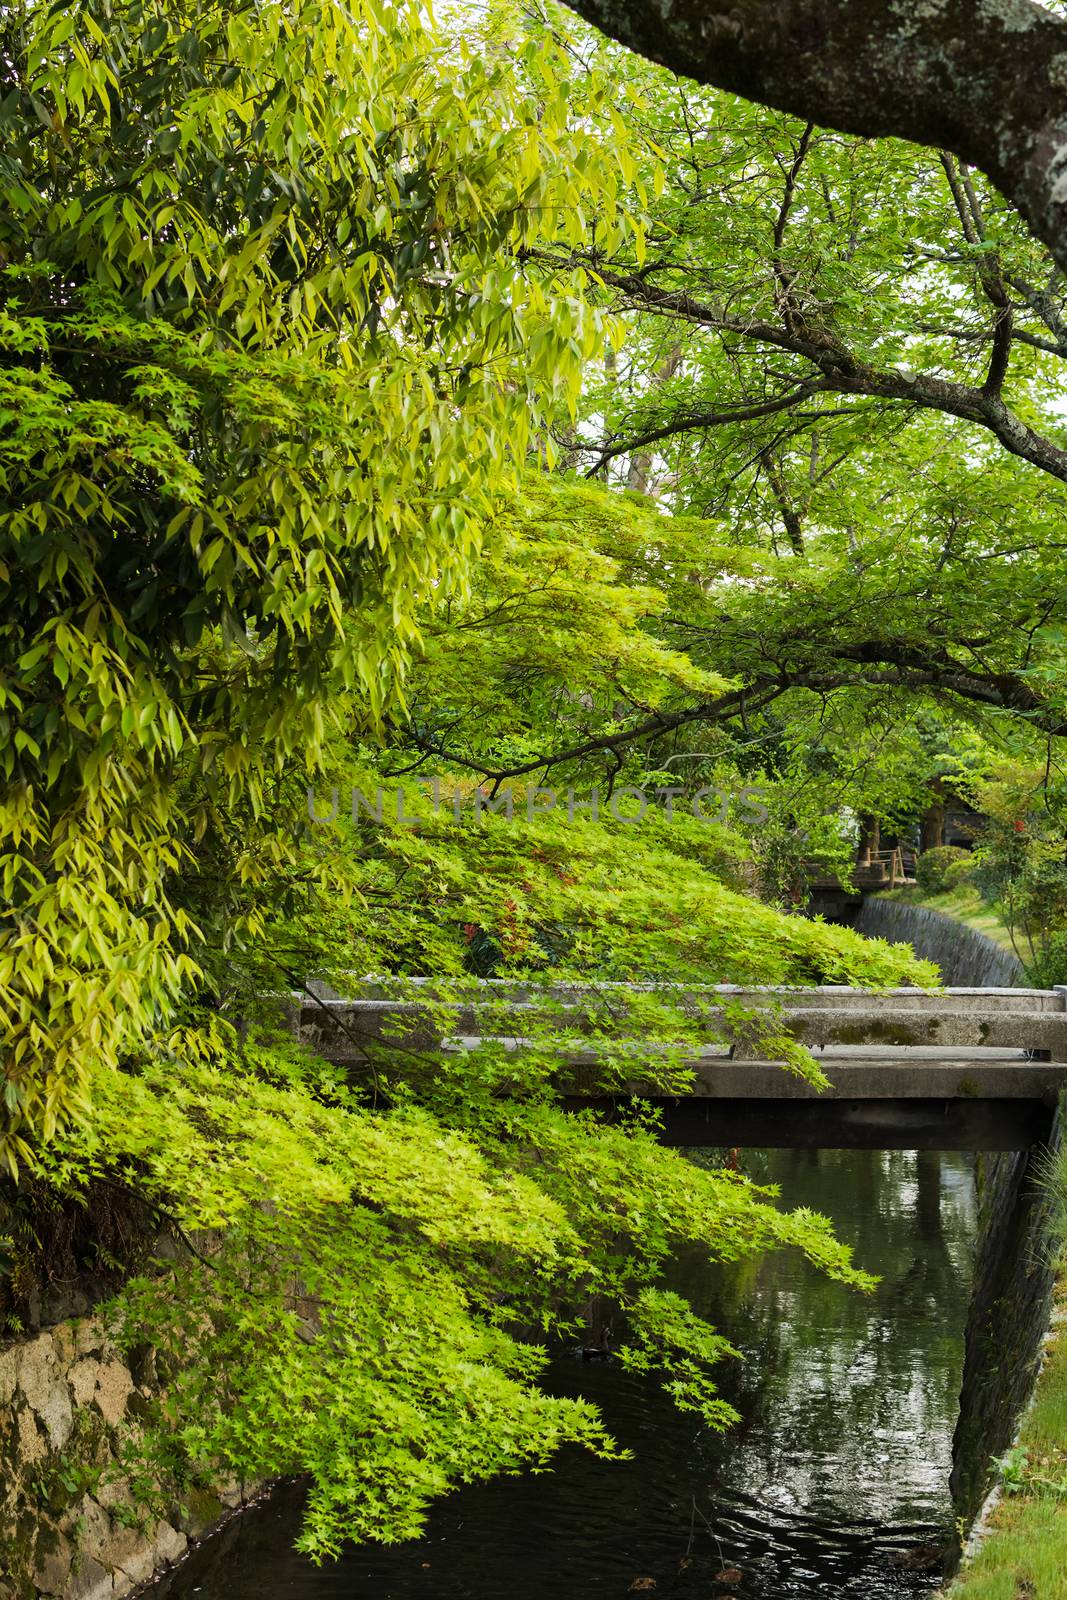 Emerald green maple and a variety of plants grown near the small stream in Kyoto.